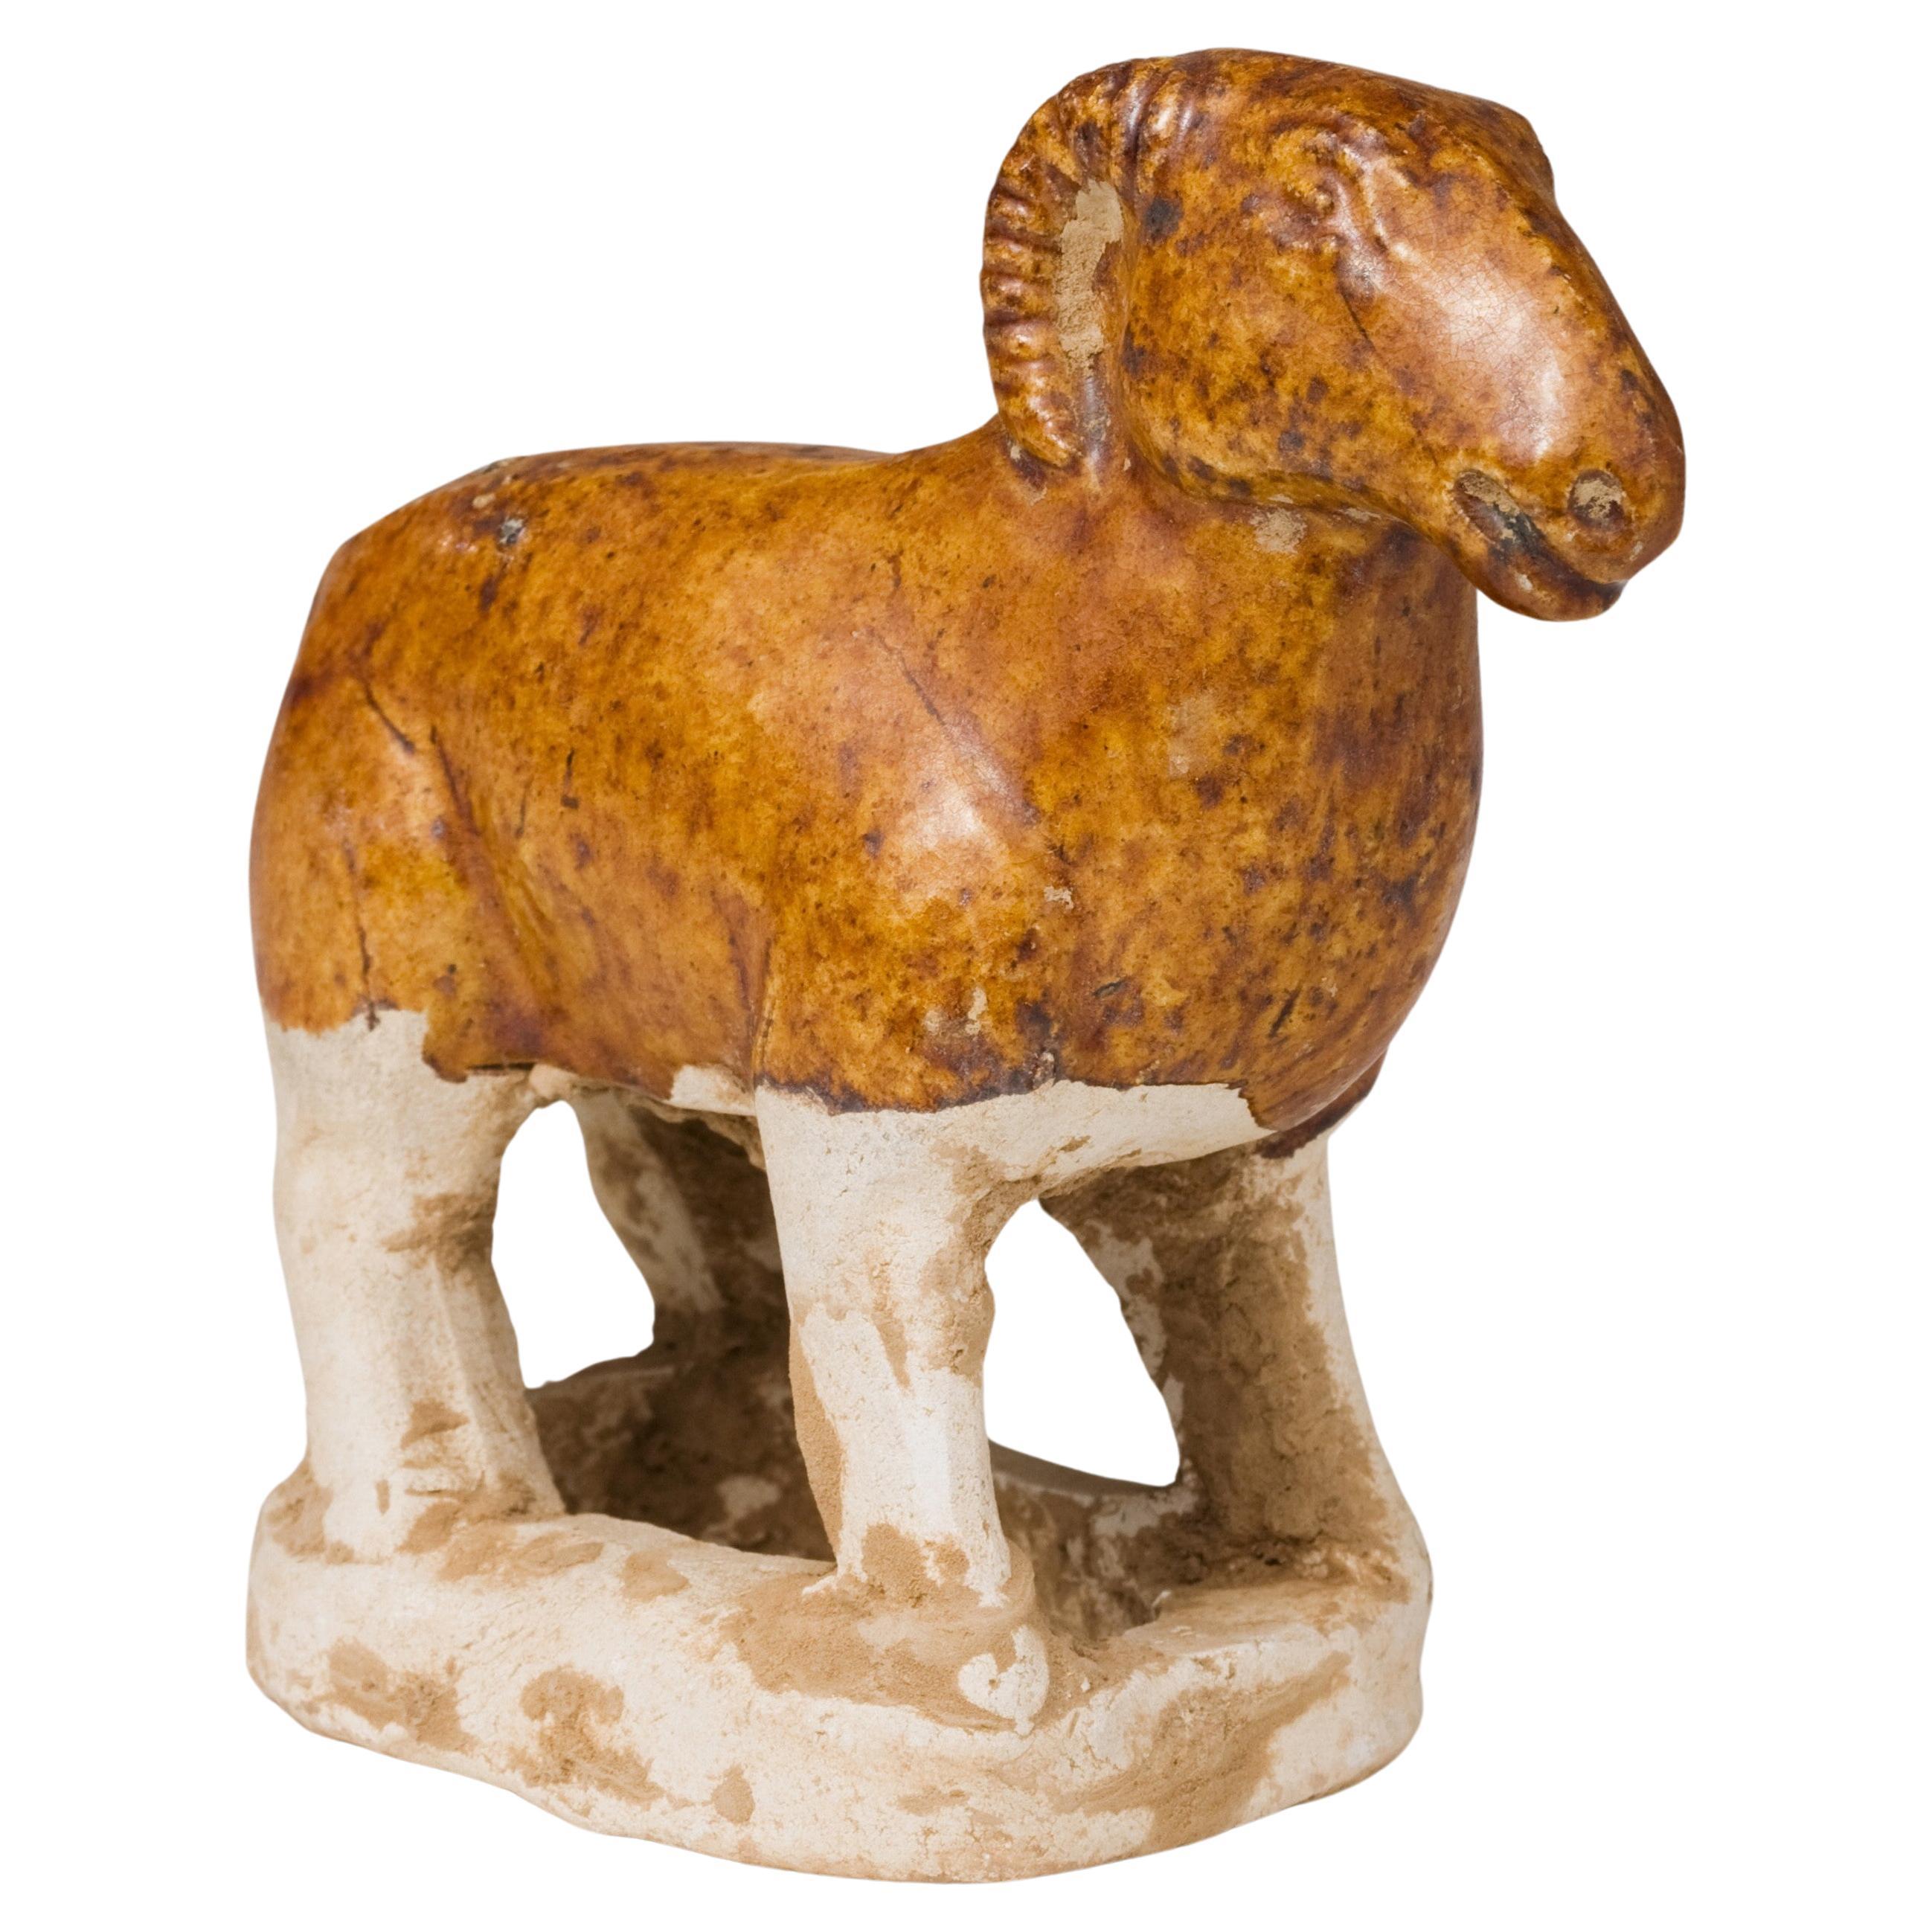 Amber-Glazed Pottery Figure of Sheep, Tang Dynasty (7-10th Century)